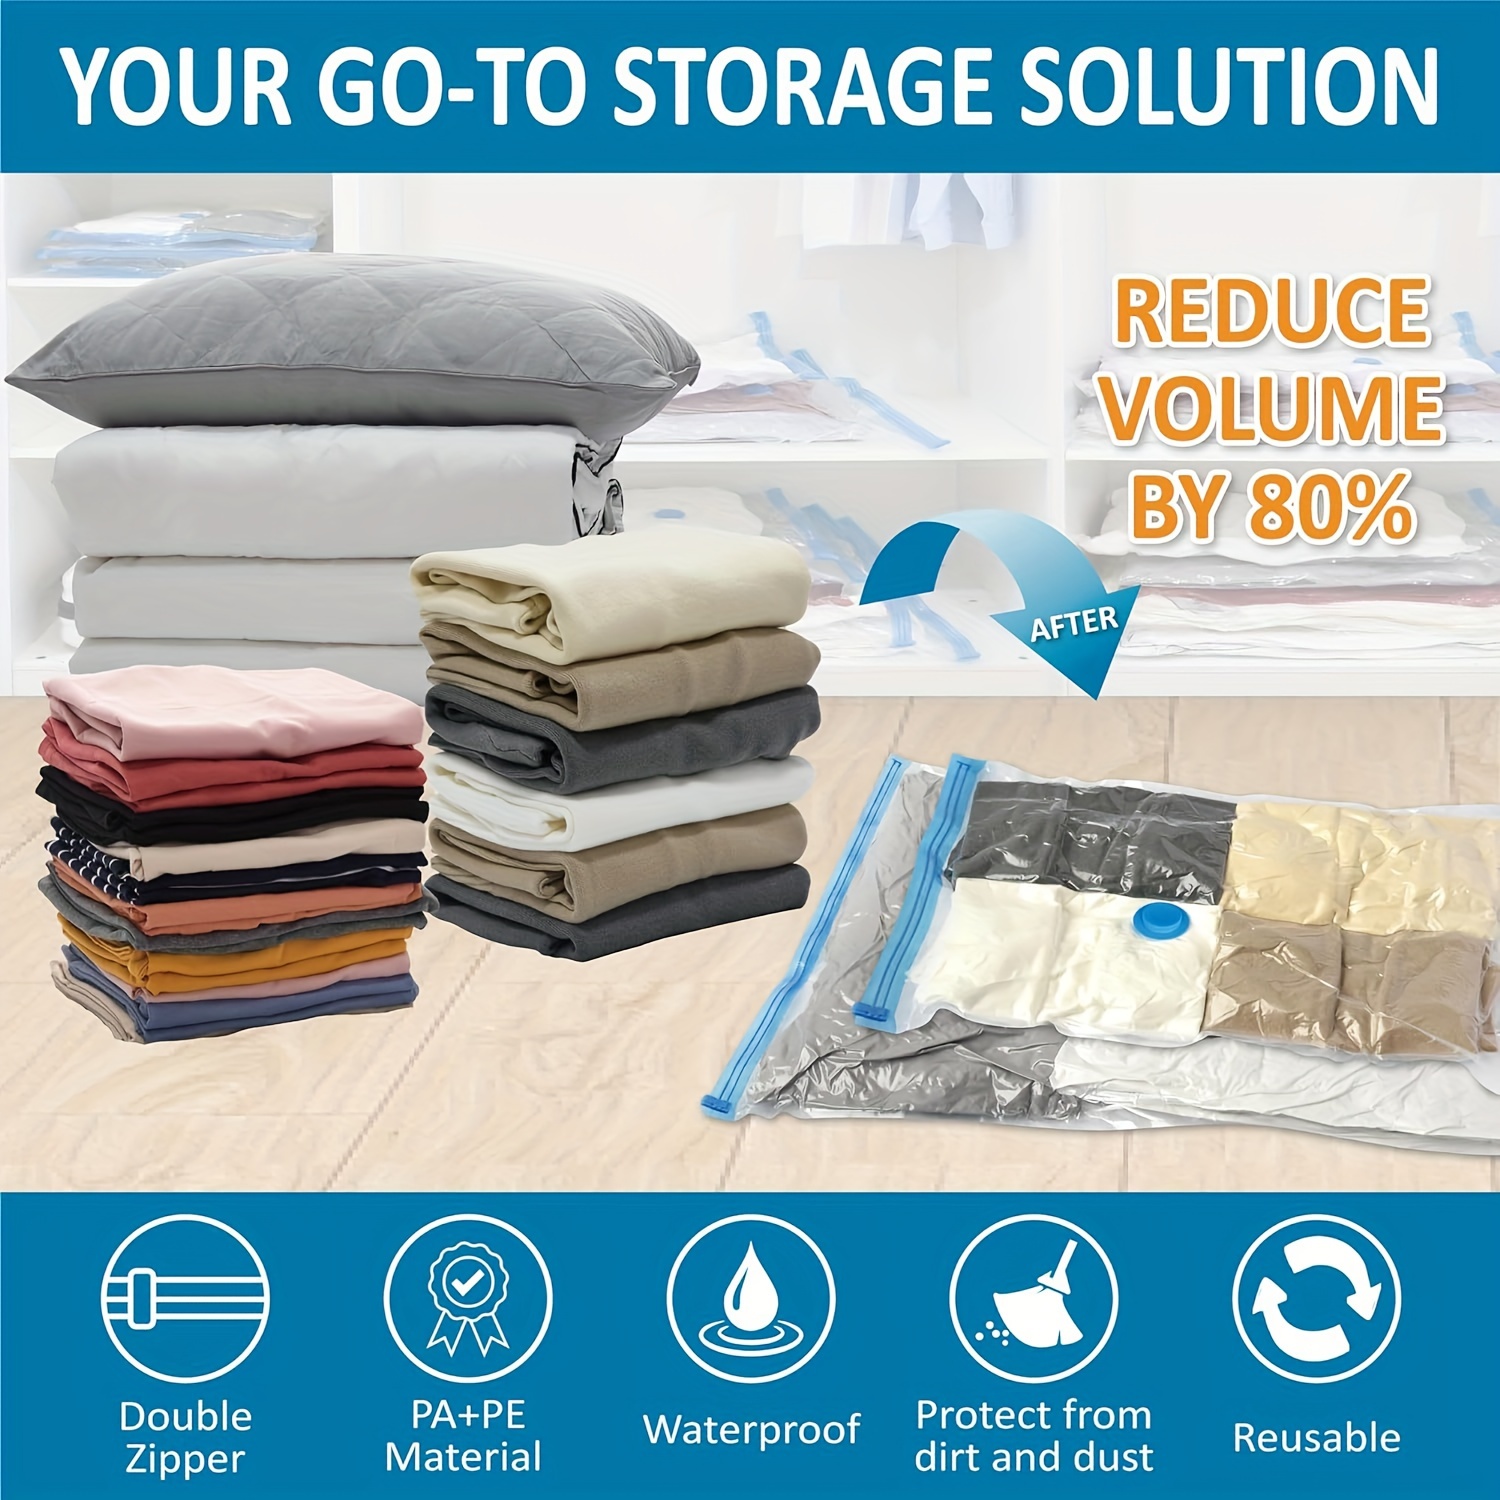 

7 Jumbo Vacuum Bags For Clothes, Pillows, And Bedding - Compression Storage Solution To Save Space - Airtight Sealing Technology